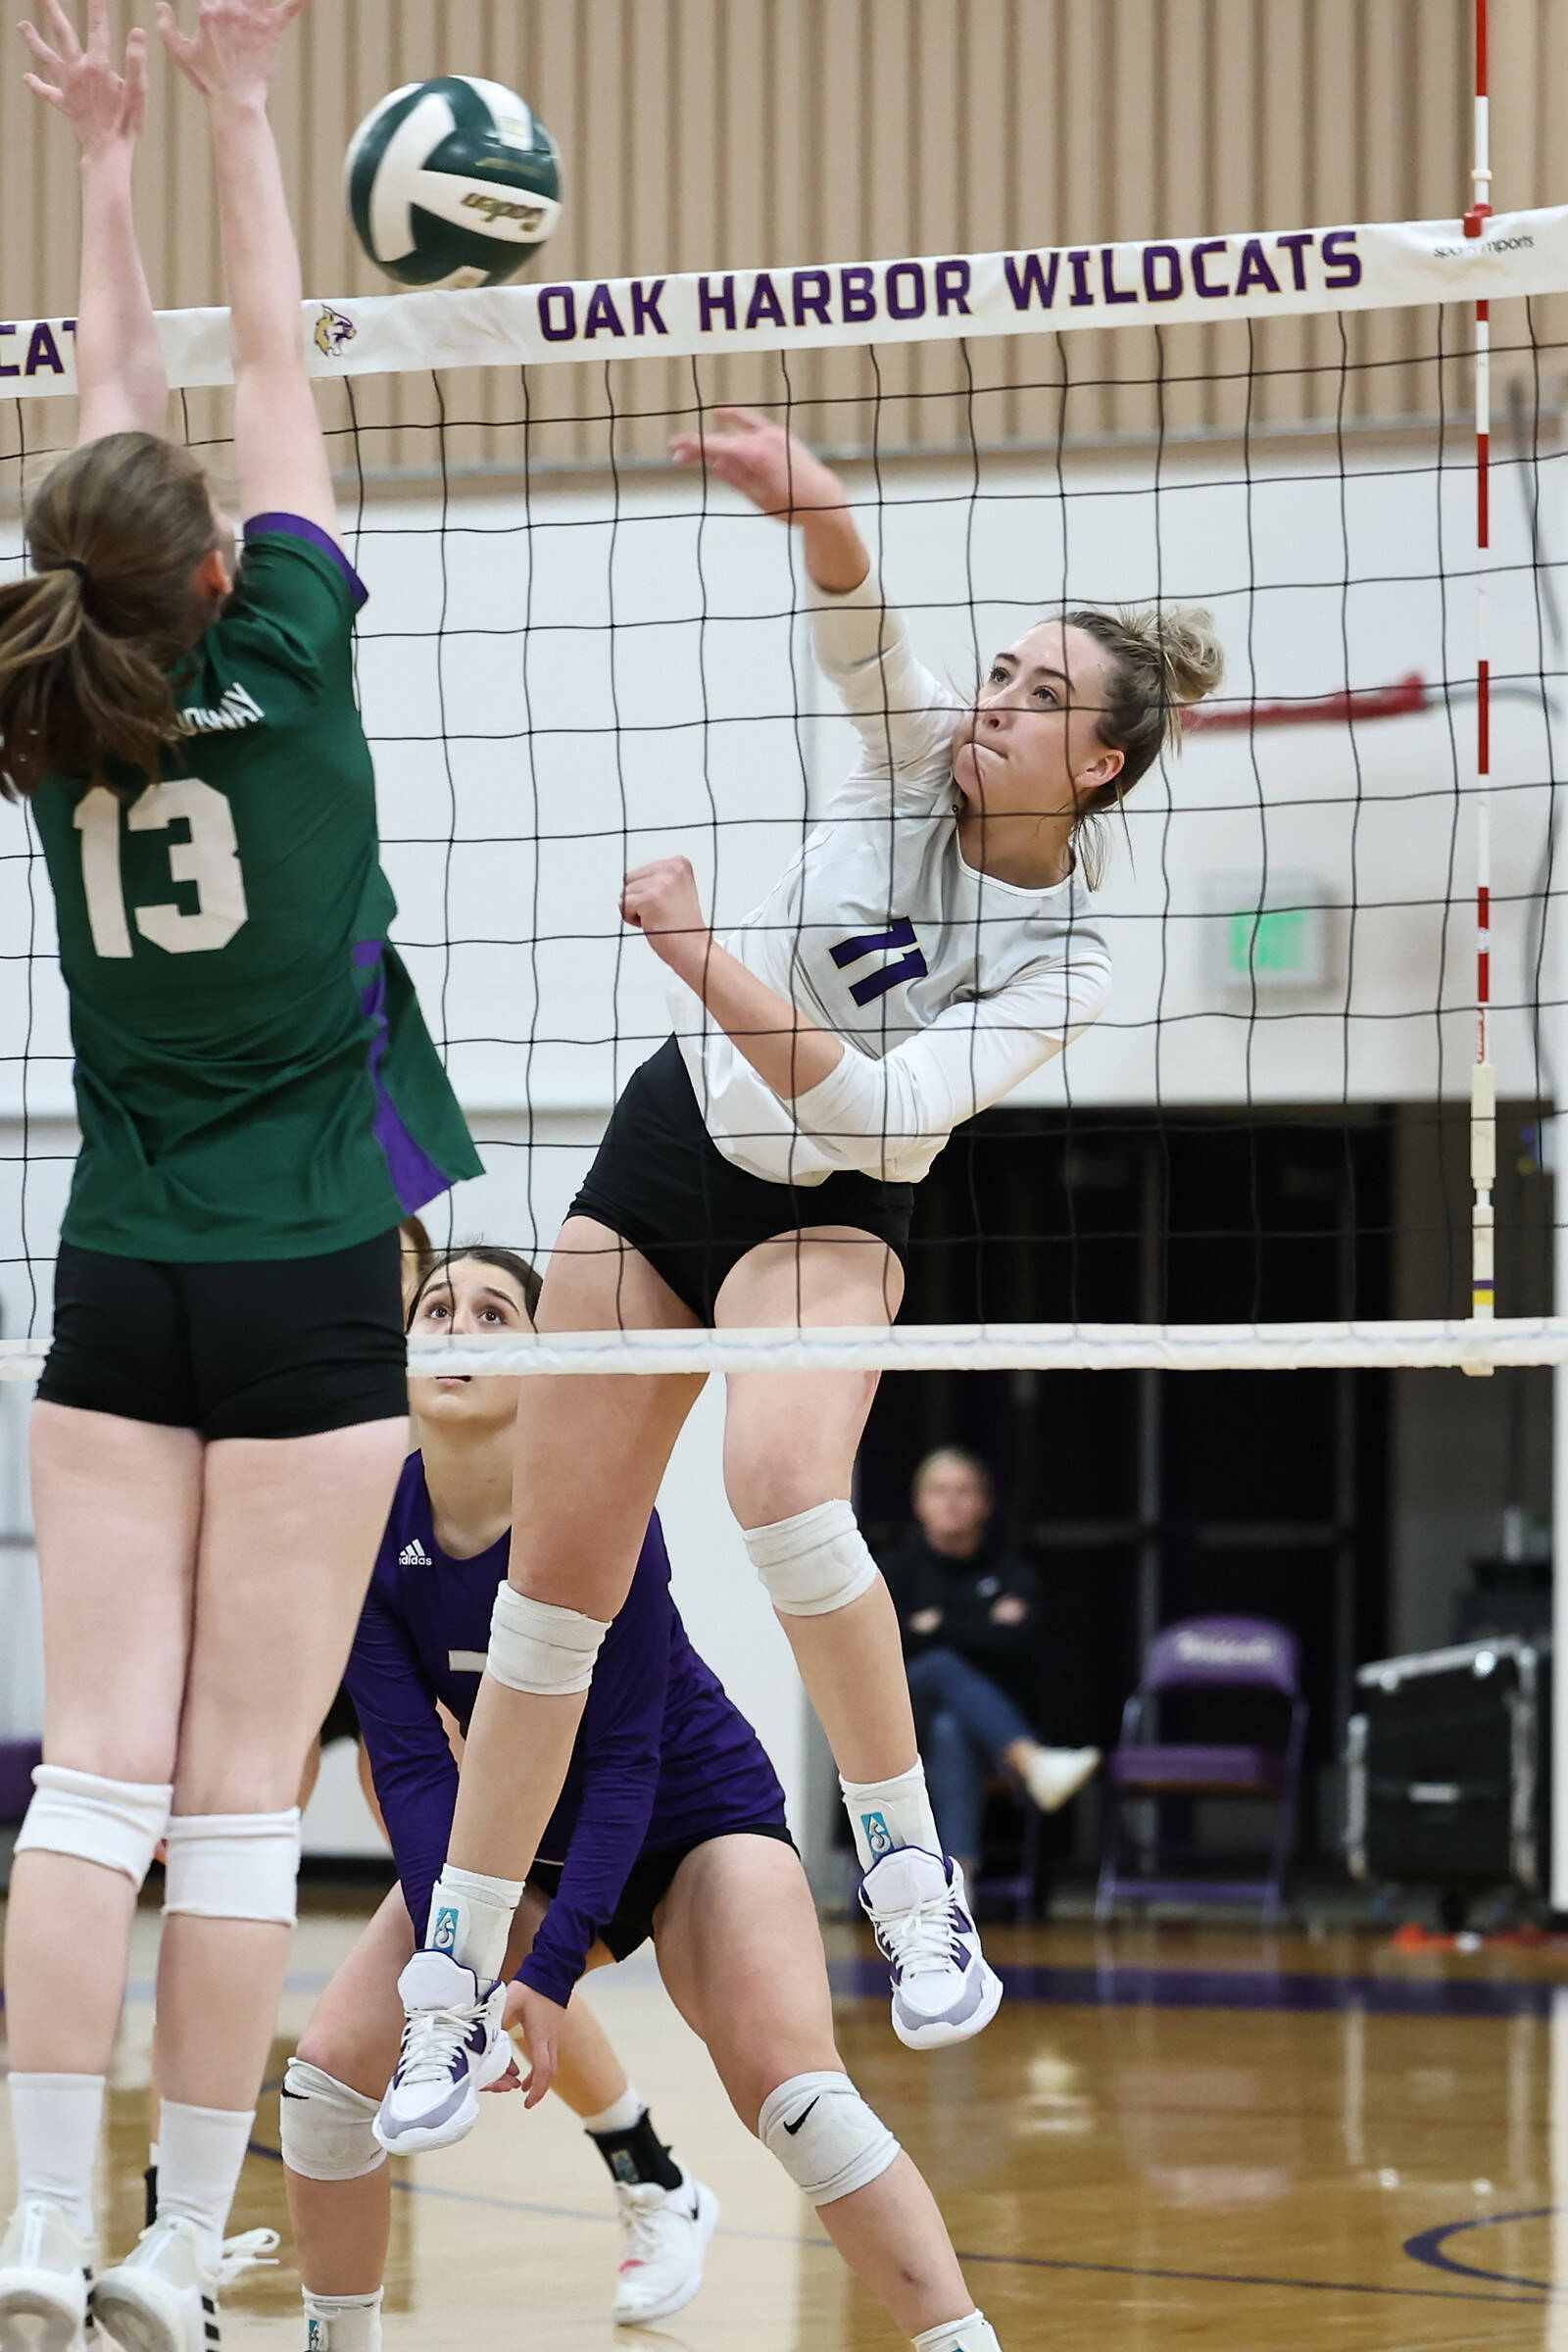 Photo by John Fisken
Oak Harbor senior and outside hitter Sydney Walker hits the ball during the Nov. 3 game against Edmonds. Walker had eight kills and seven digs for the night. The Oak Harbor varsity girls volleyball team defeated Edmonds 25-23, 25-22, 26-24 and is 6-4-1 overall this season.